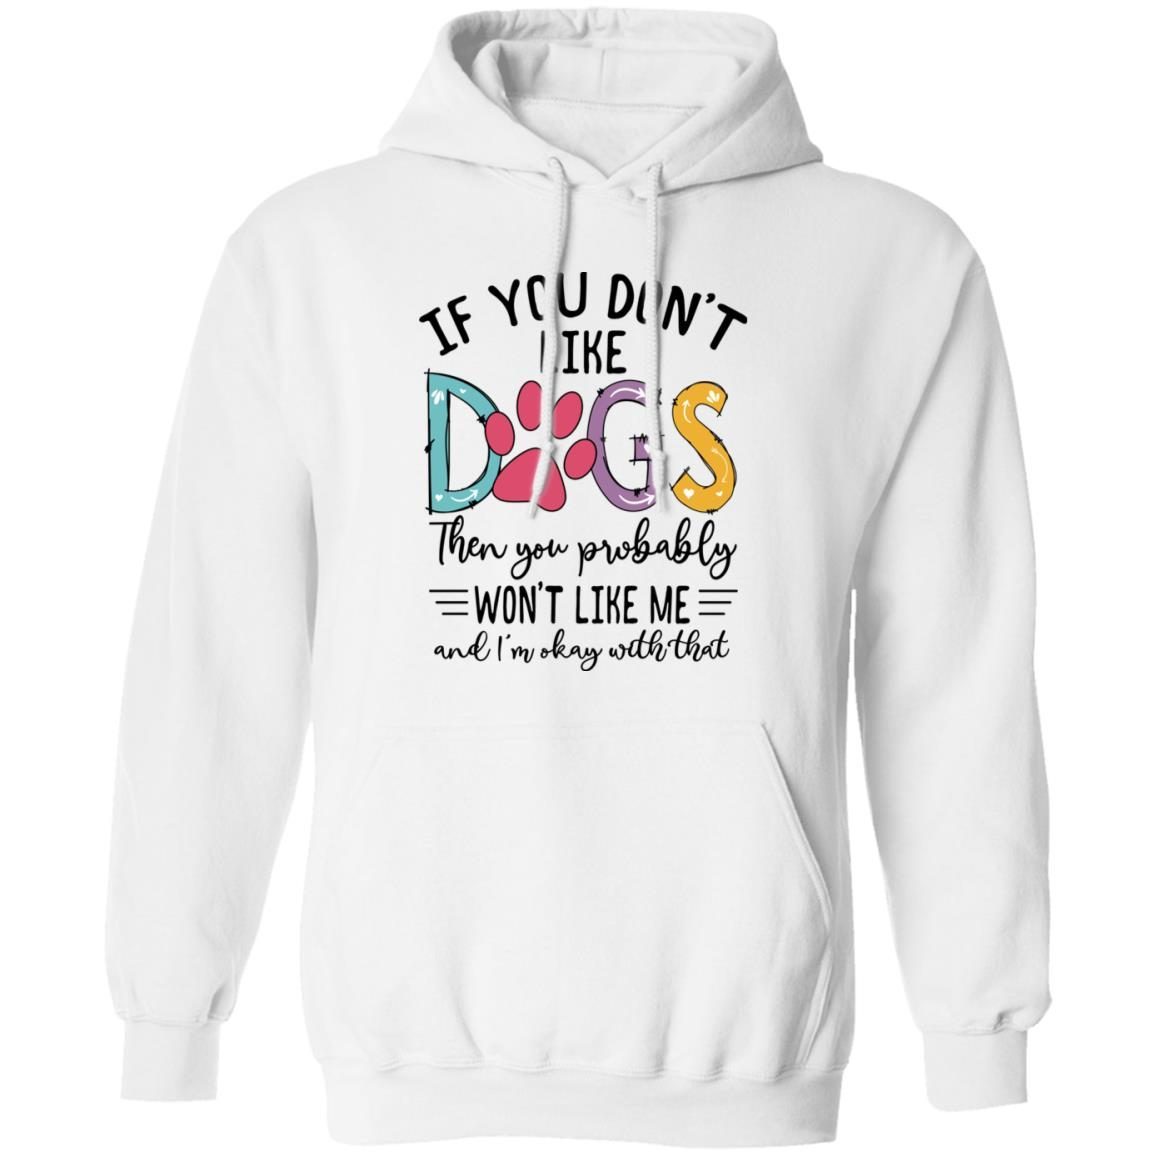 If You Don’t Like Dogs Then You Probably Won’t Like Me shirt 3